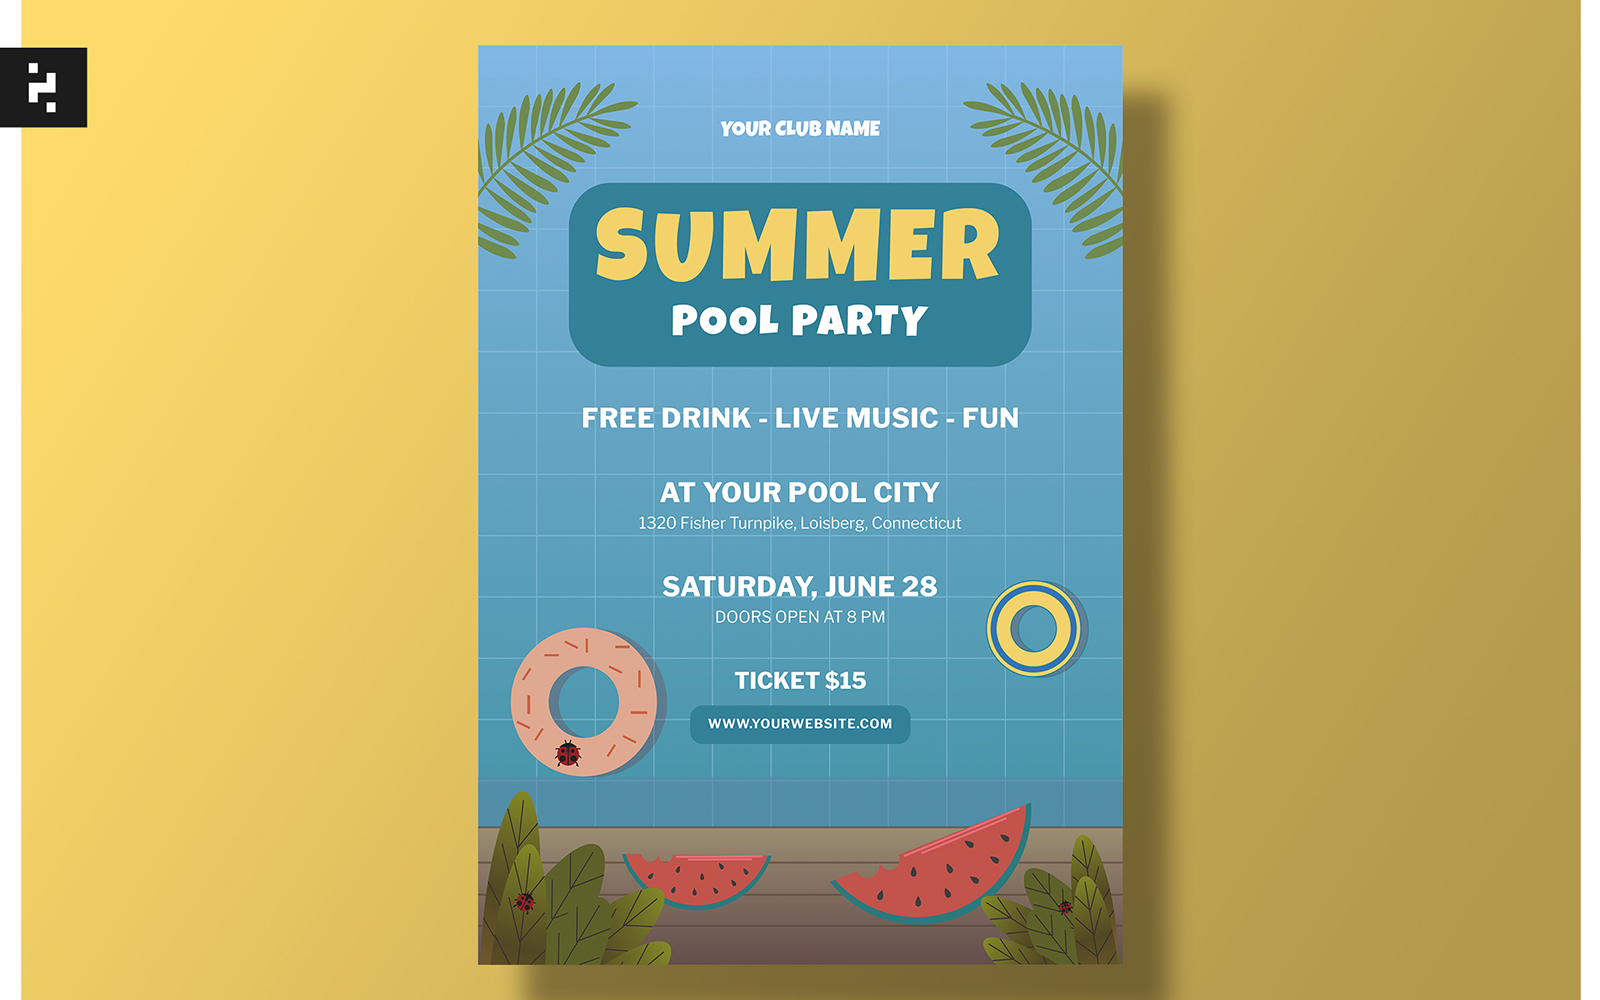 Summer Pool Party Flyer Kit Template